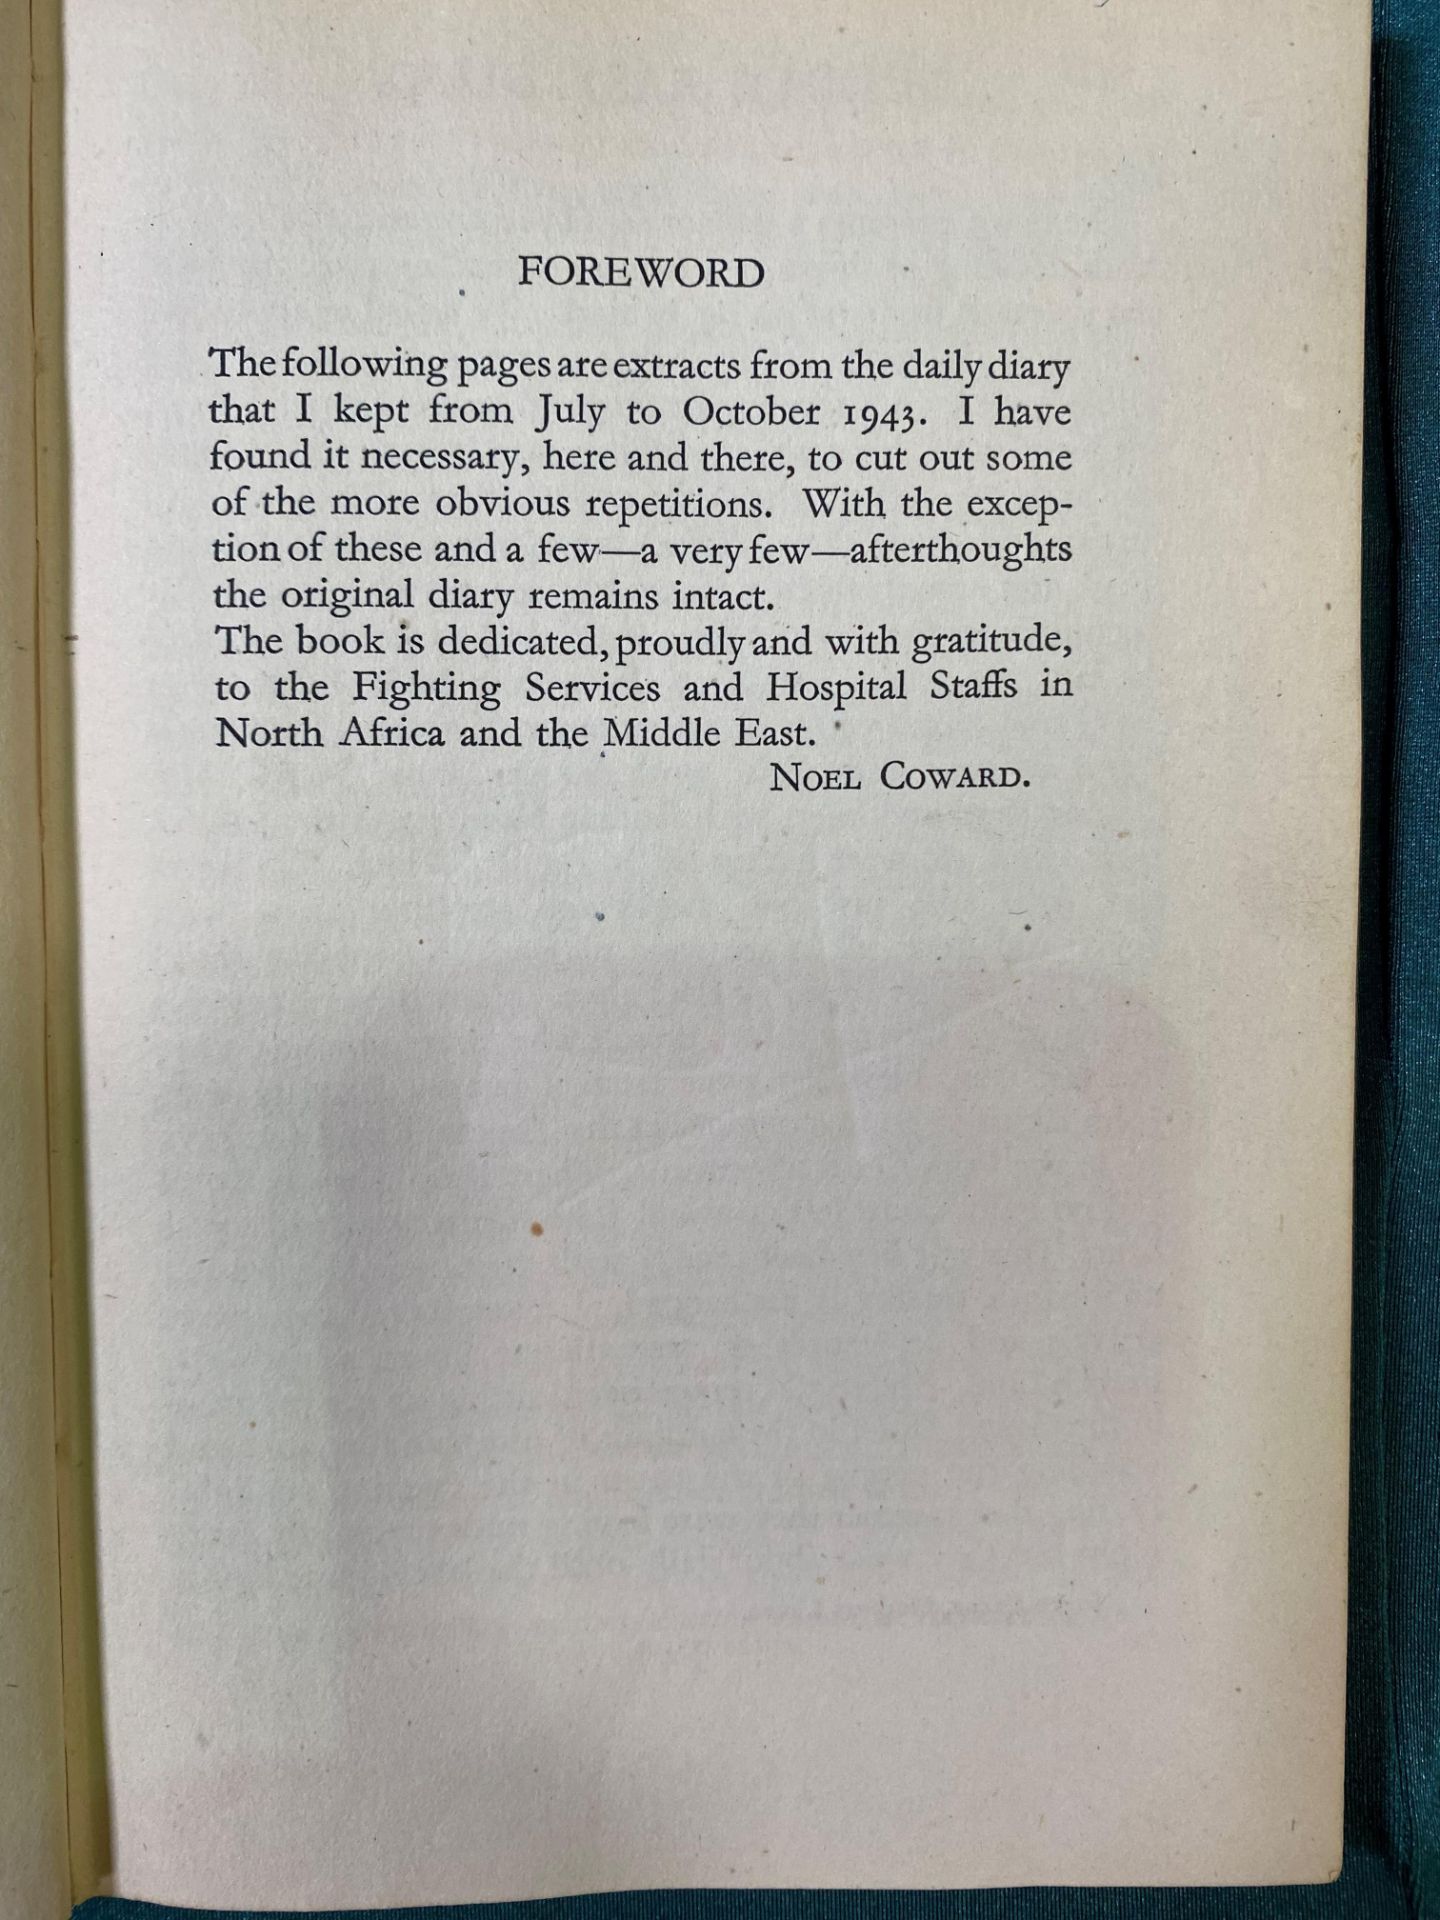 Noel Coward, Middle East Diary, first edition, William Heinemann Ltd, 1944 - Image 5 of 7